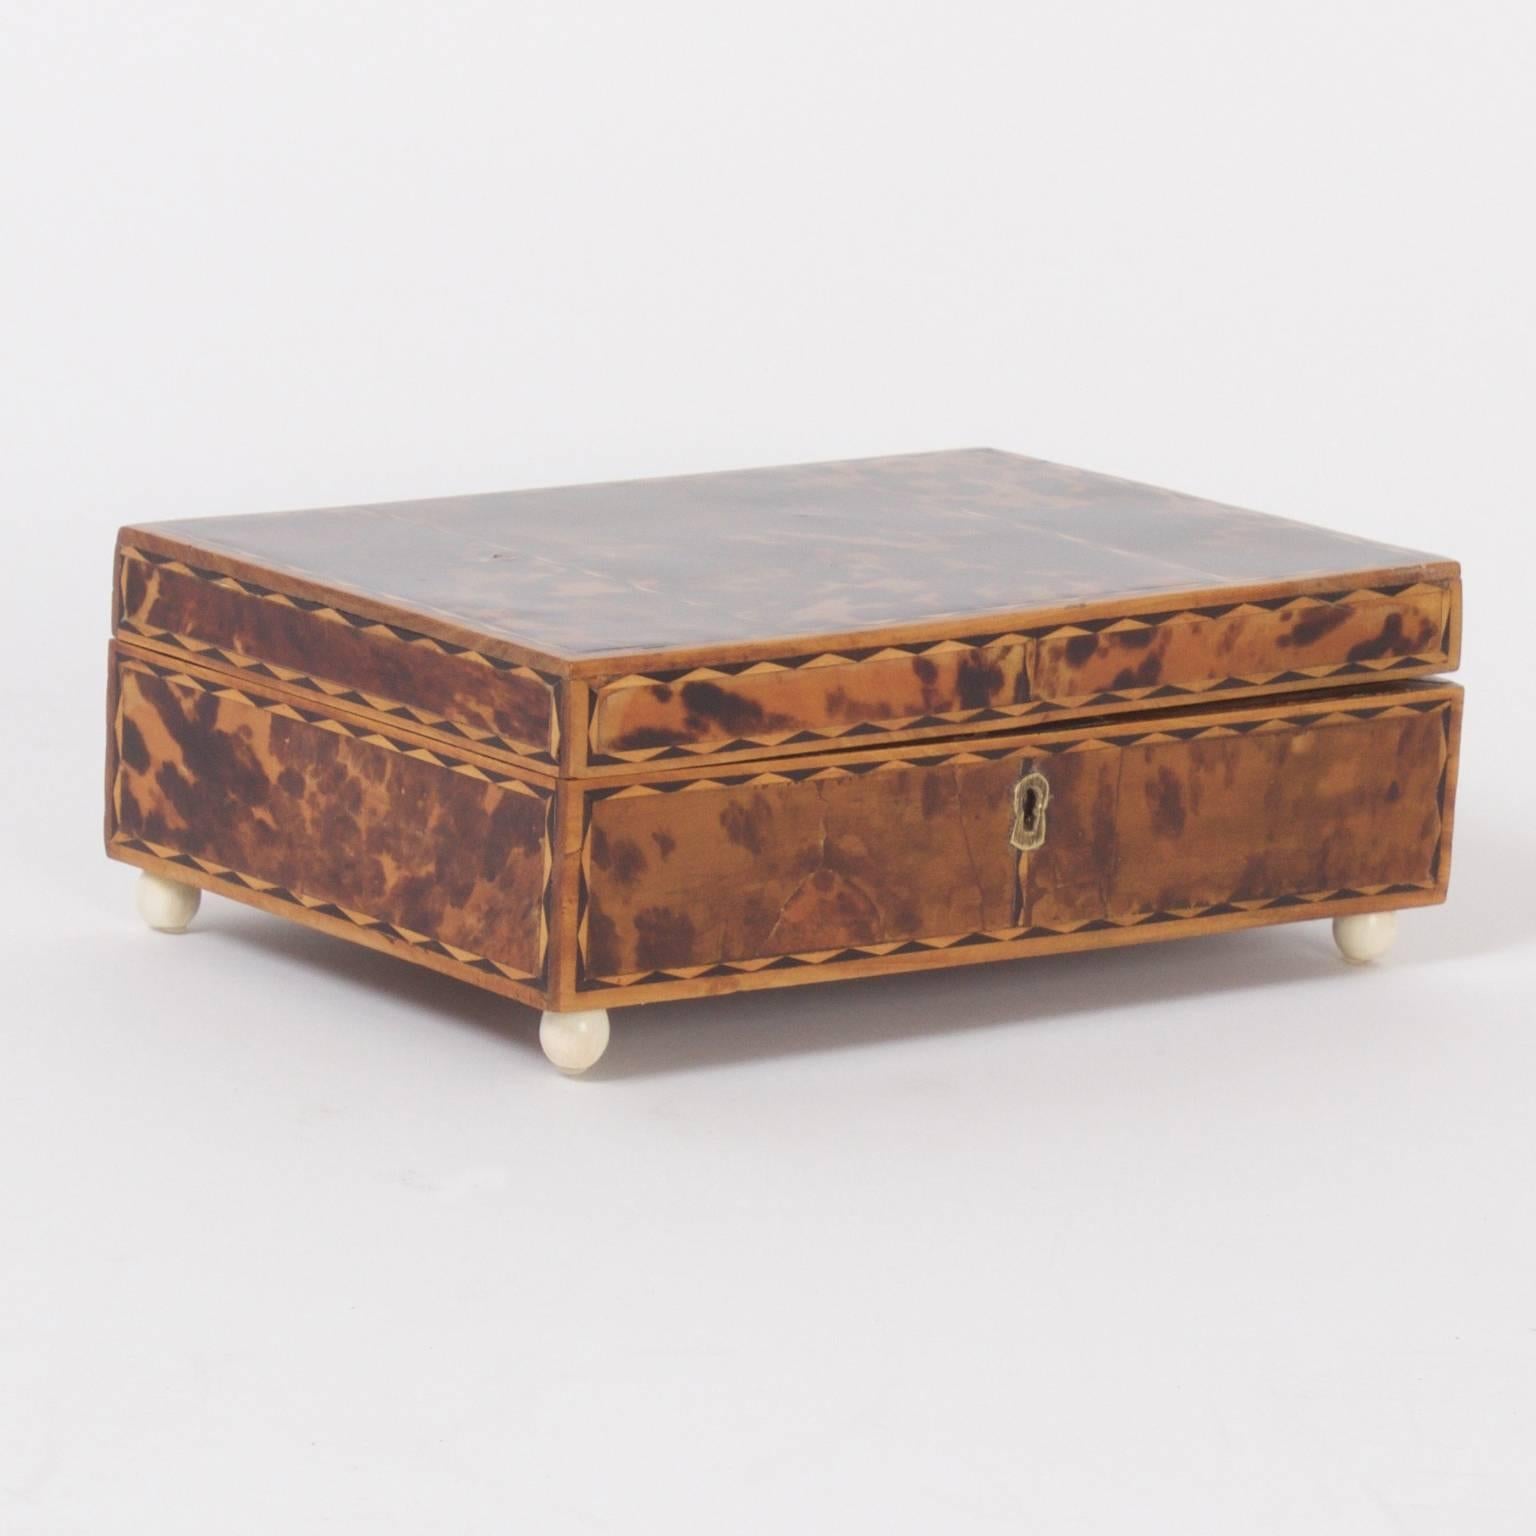 Charming antique Anglo Indian box and key crafted with hardwood and decorated with tortoiseshell and exotic wood veneers.
